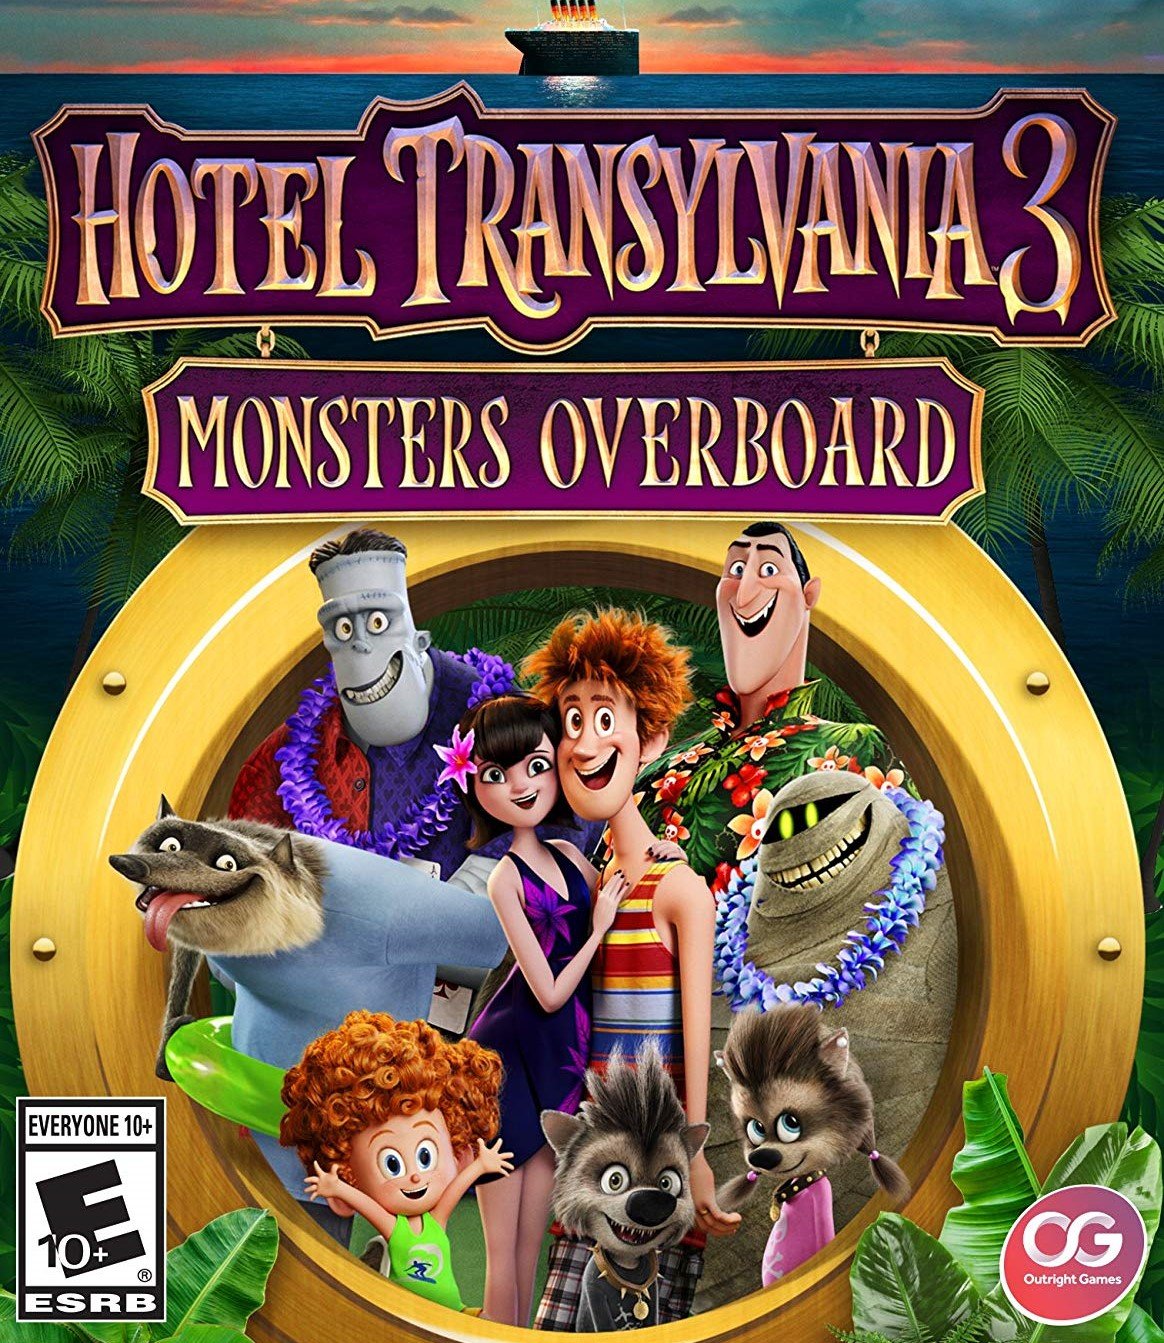 Image of Hotel Transylvania 3: Monsters Overboard